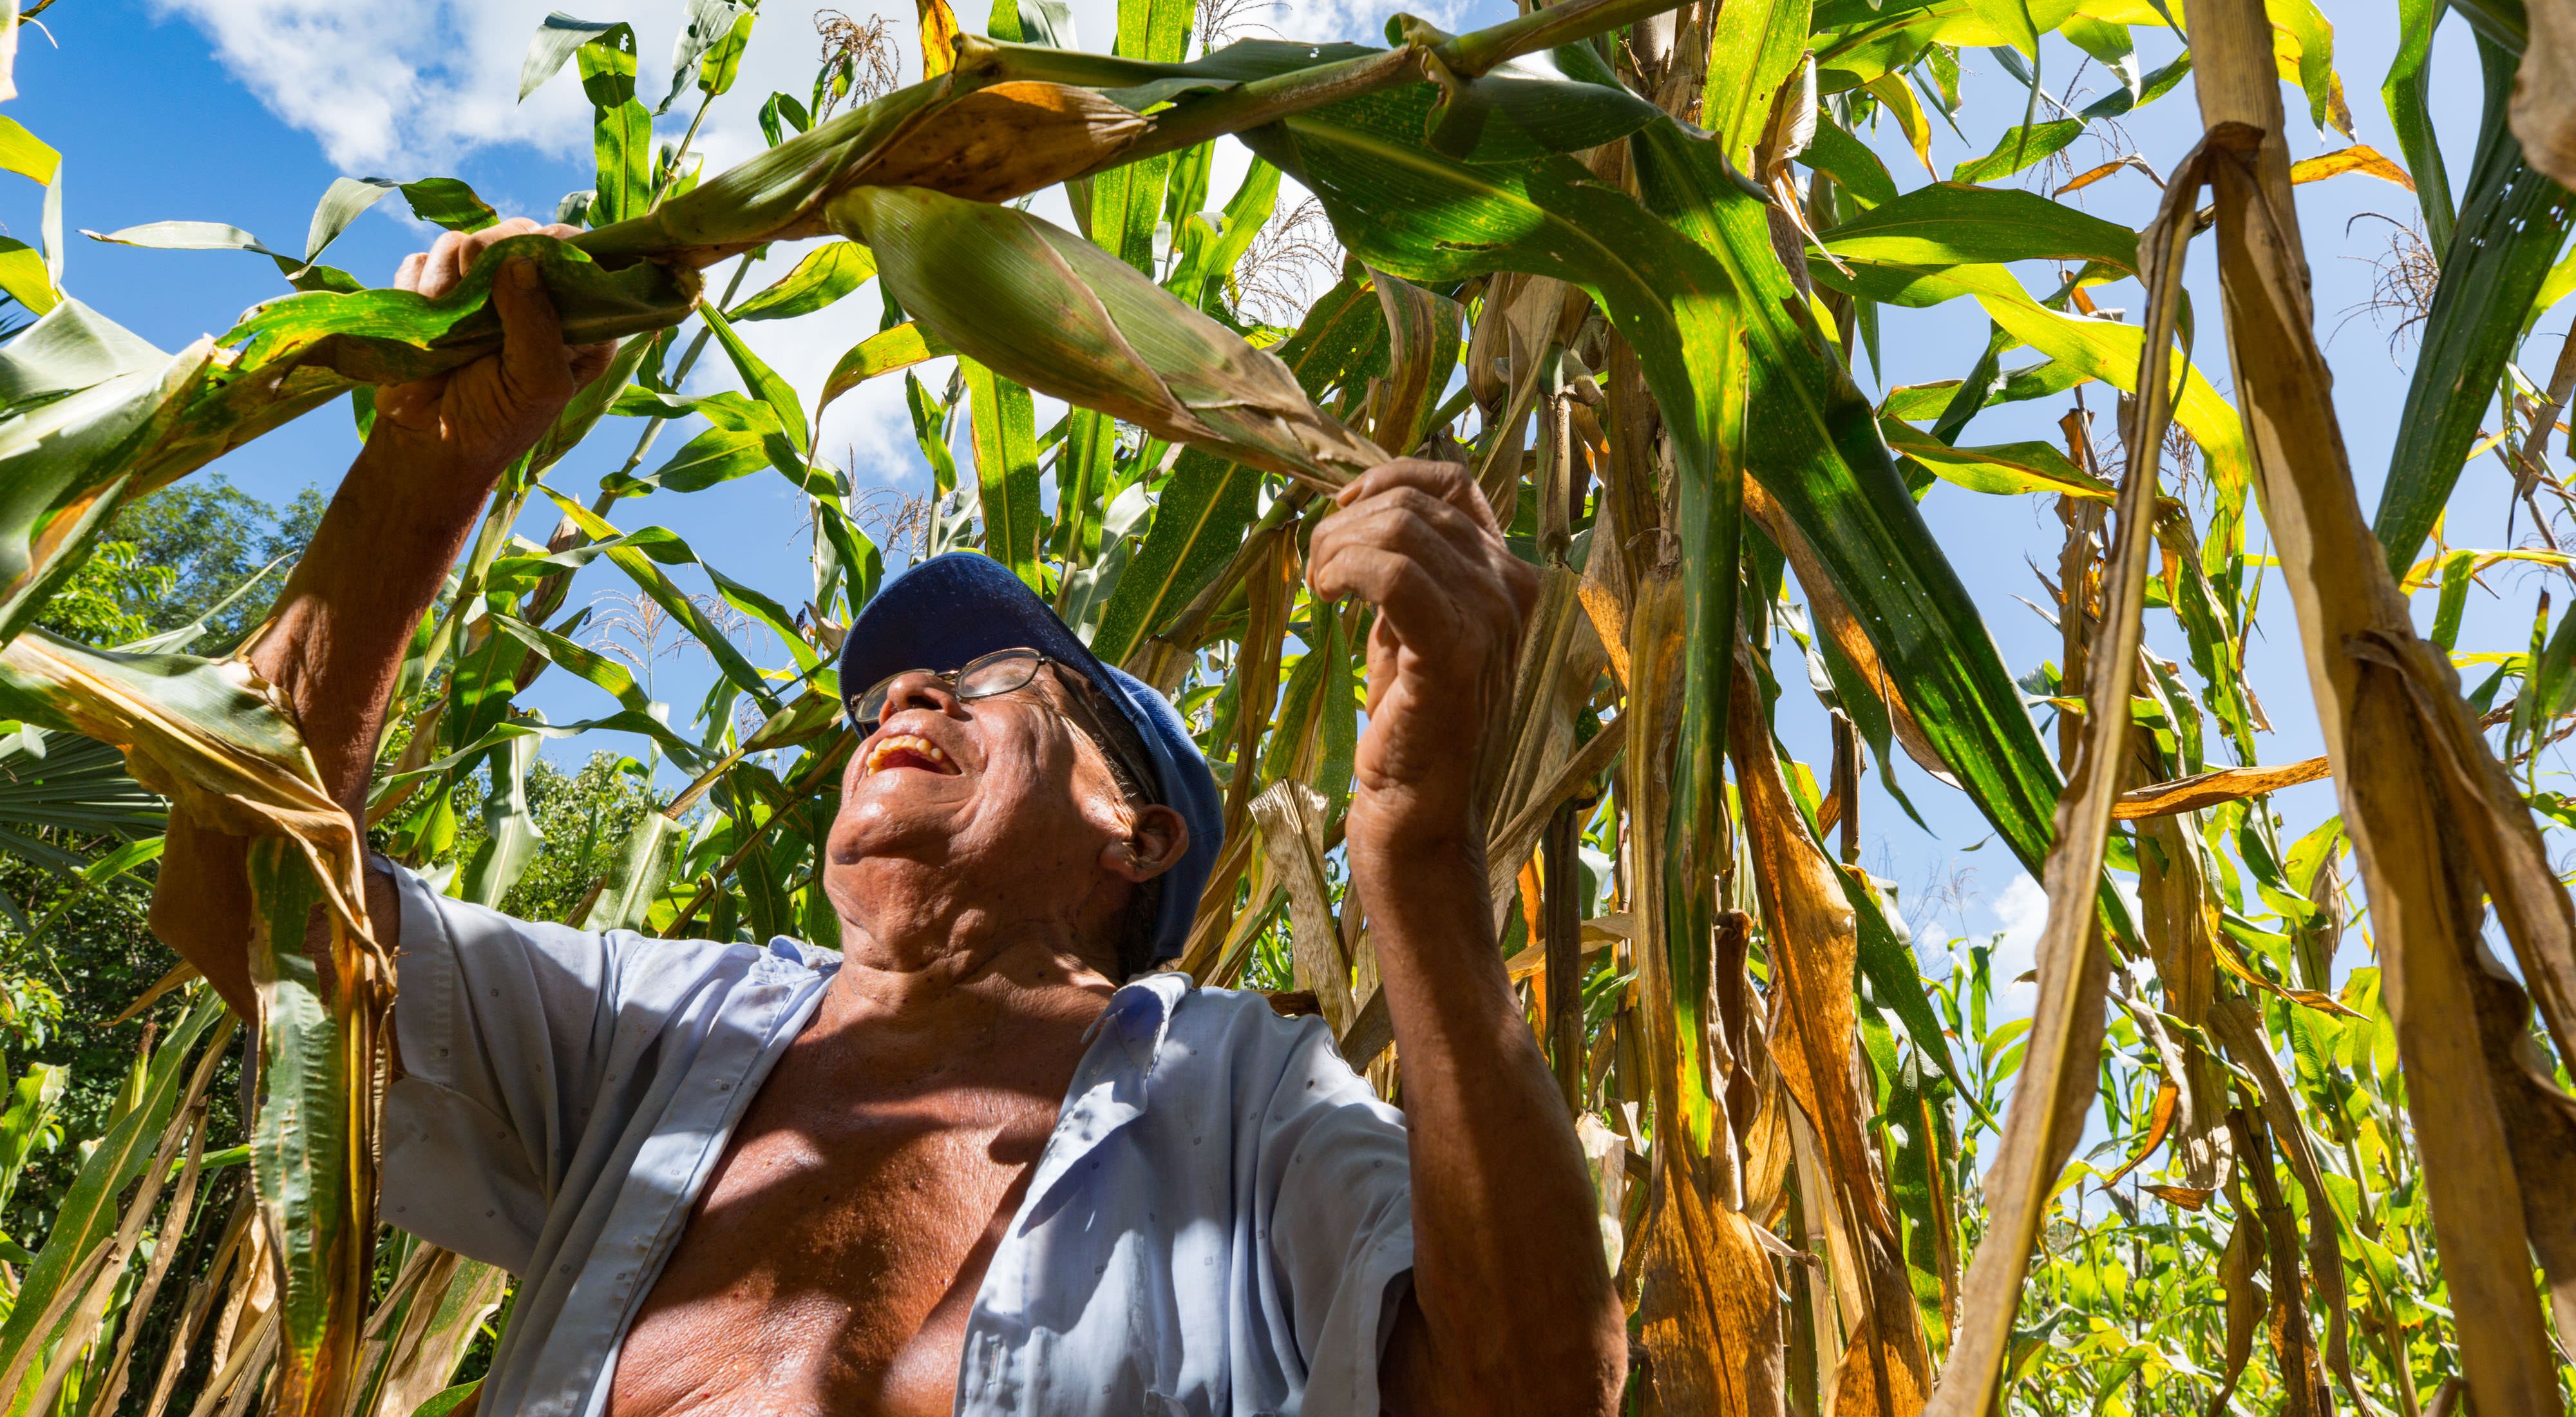 79-year-old Dionisio Yam Moo checks on his corn in his "milpa" personal agricultural field, Mexico. He has adopted his own method of conservation agriculture planting beans high in nitrogen below his corn plants. The Nature Conservancy works with landowners, communities, and governments in Mexico to promote low-carbon rural development through the design and implementation of improved policy and practice in agriculture, ranching, and forestry. The Conservancy is leading the initiative, Mexico REDD+ Program in conjunction with the Rainforest Alliance, the Woods Hole Research Center, and Espacios Naturales y Desarrollo Sustentable. 